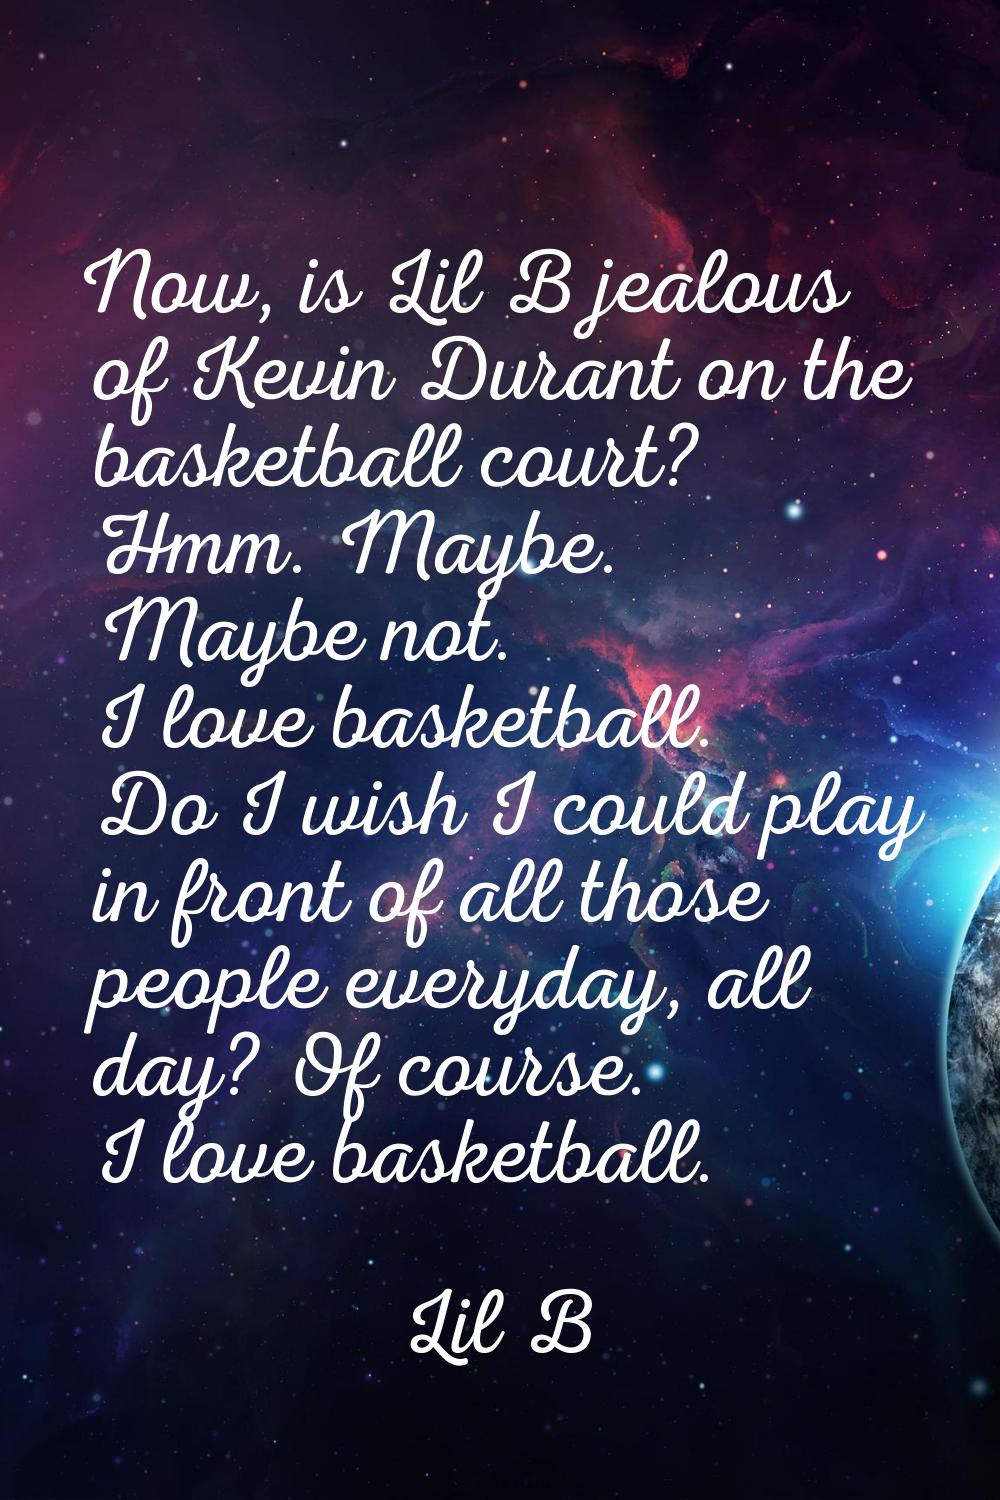 Now, is Lil B jealous of Kevin Durant on the basketball court? Hmm. Maybe. Maybe not. I love basket